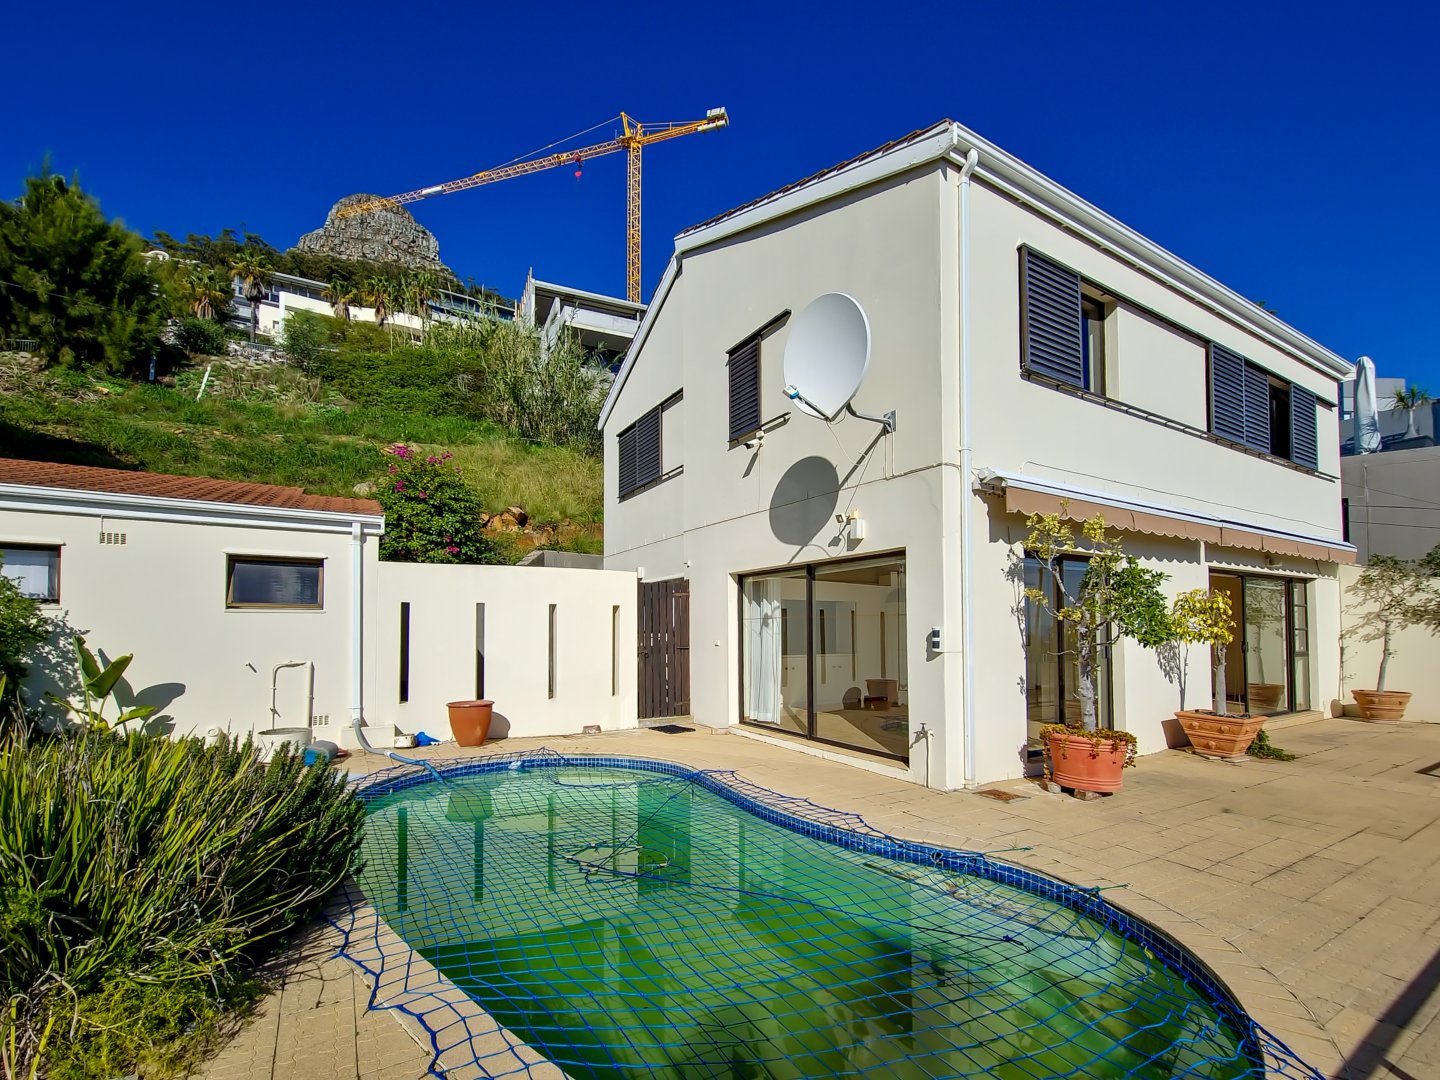 3 Bedroom House to rent in Fresnaye